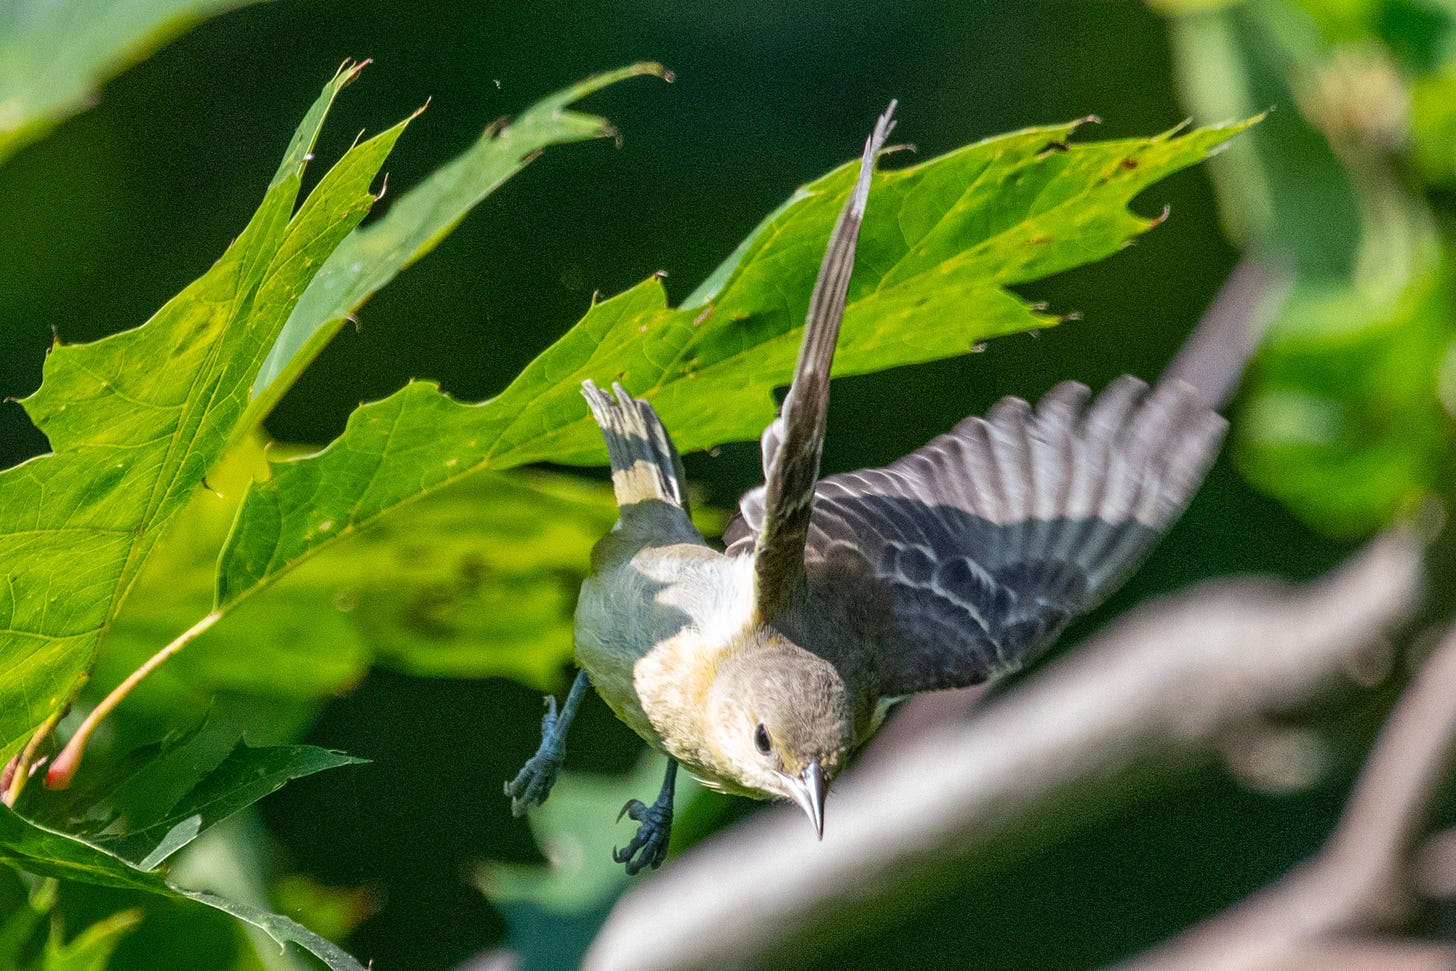 A warbling vireo diving into flight